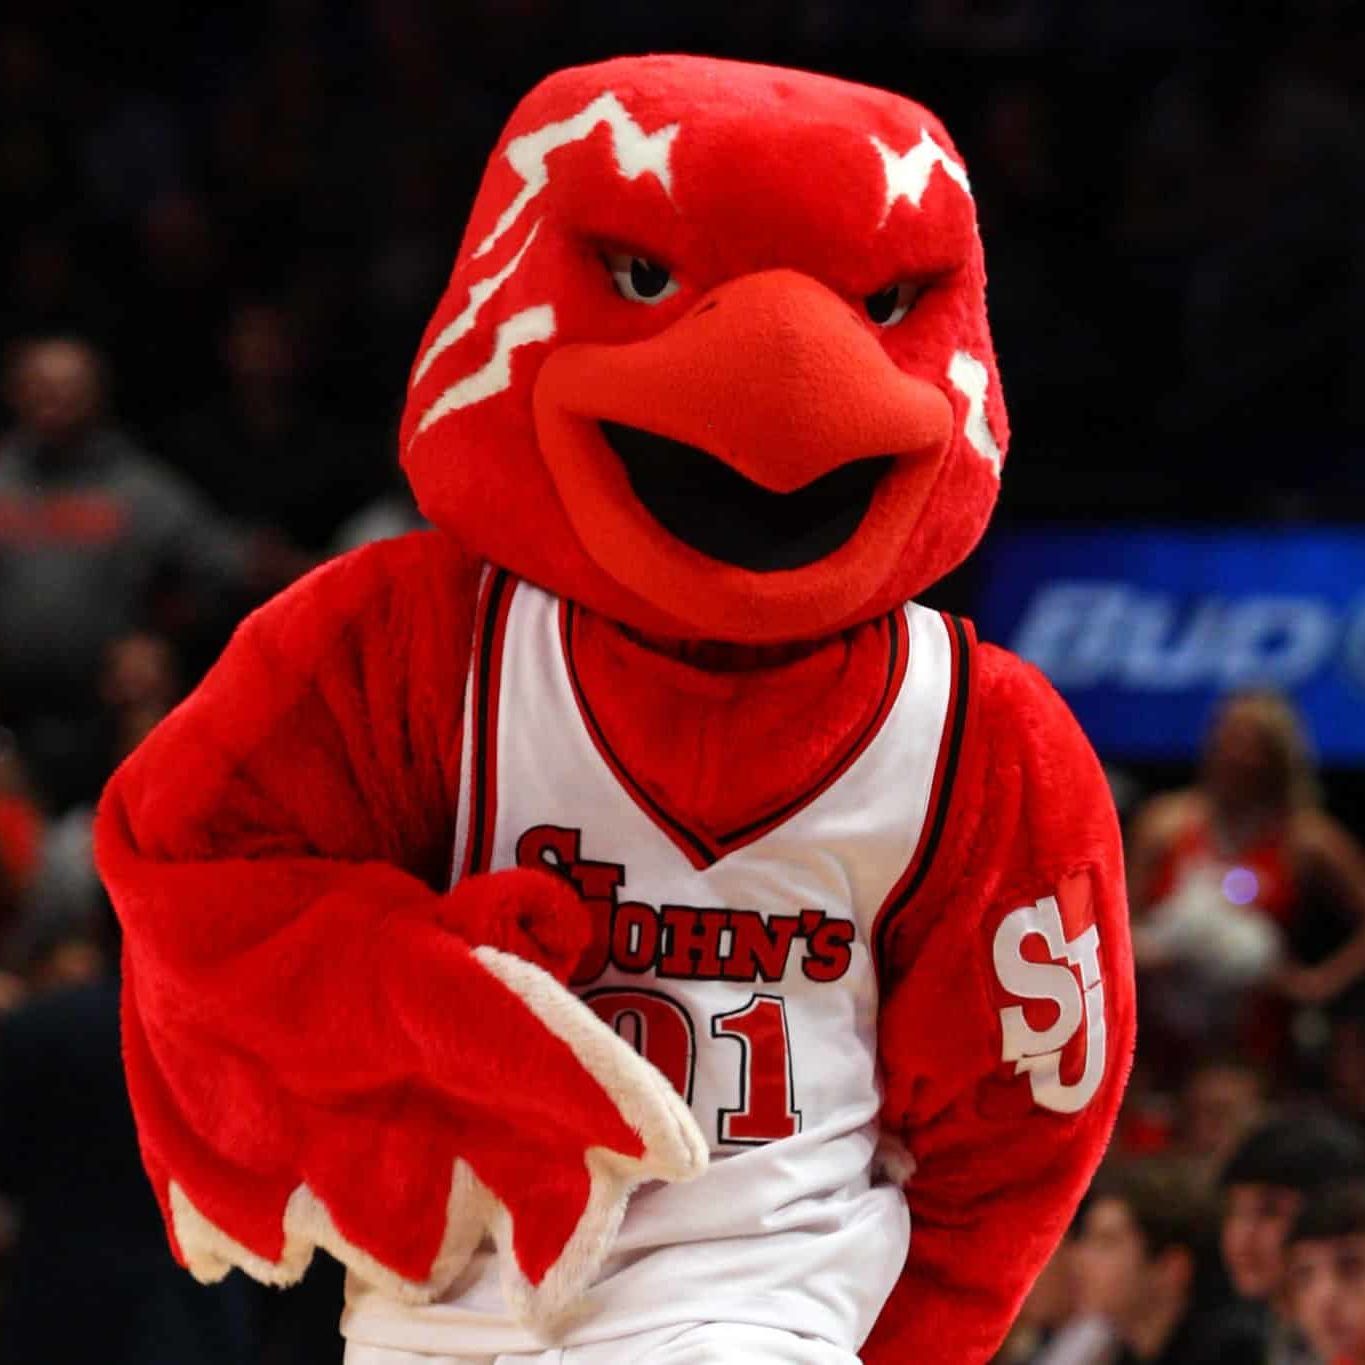 NEW YORK, NY - FEBRUARY 18:  Johnny, the mascot for the St. John's Red Storm performs against the UCLA Bruins at Madison Square Garden on February 18, 2012 in New York City.  (Photo by Chris Chambers/Getty Images)